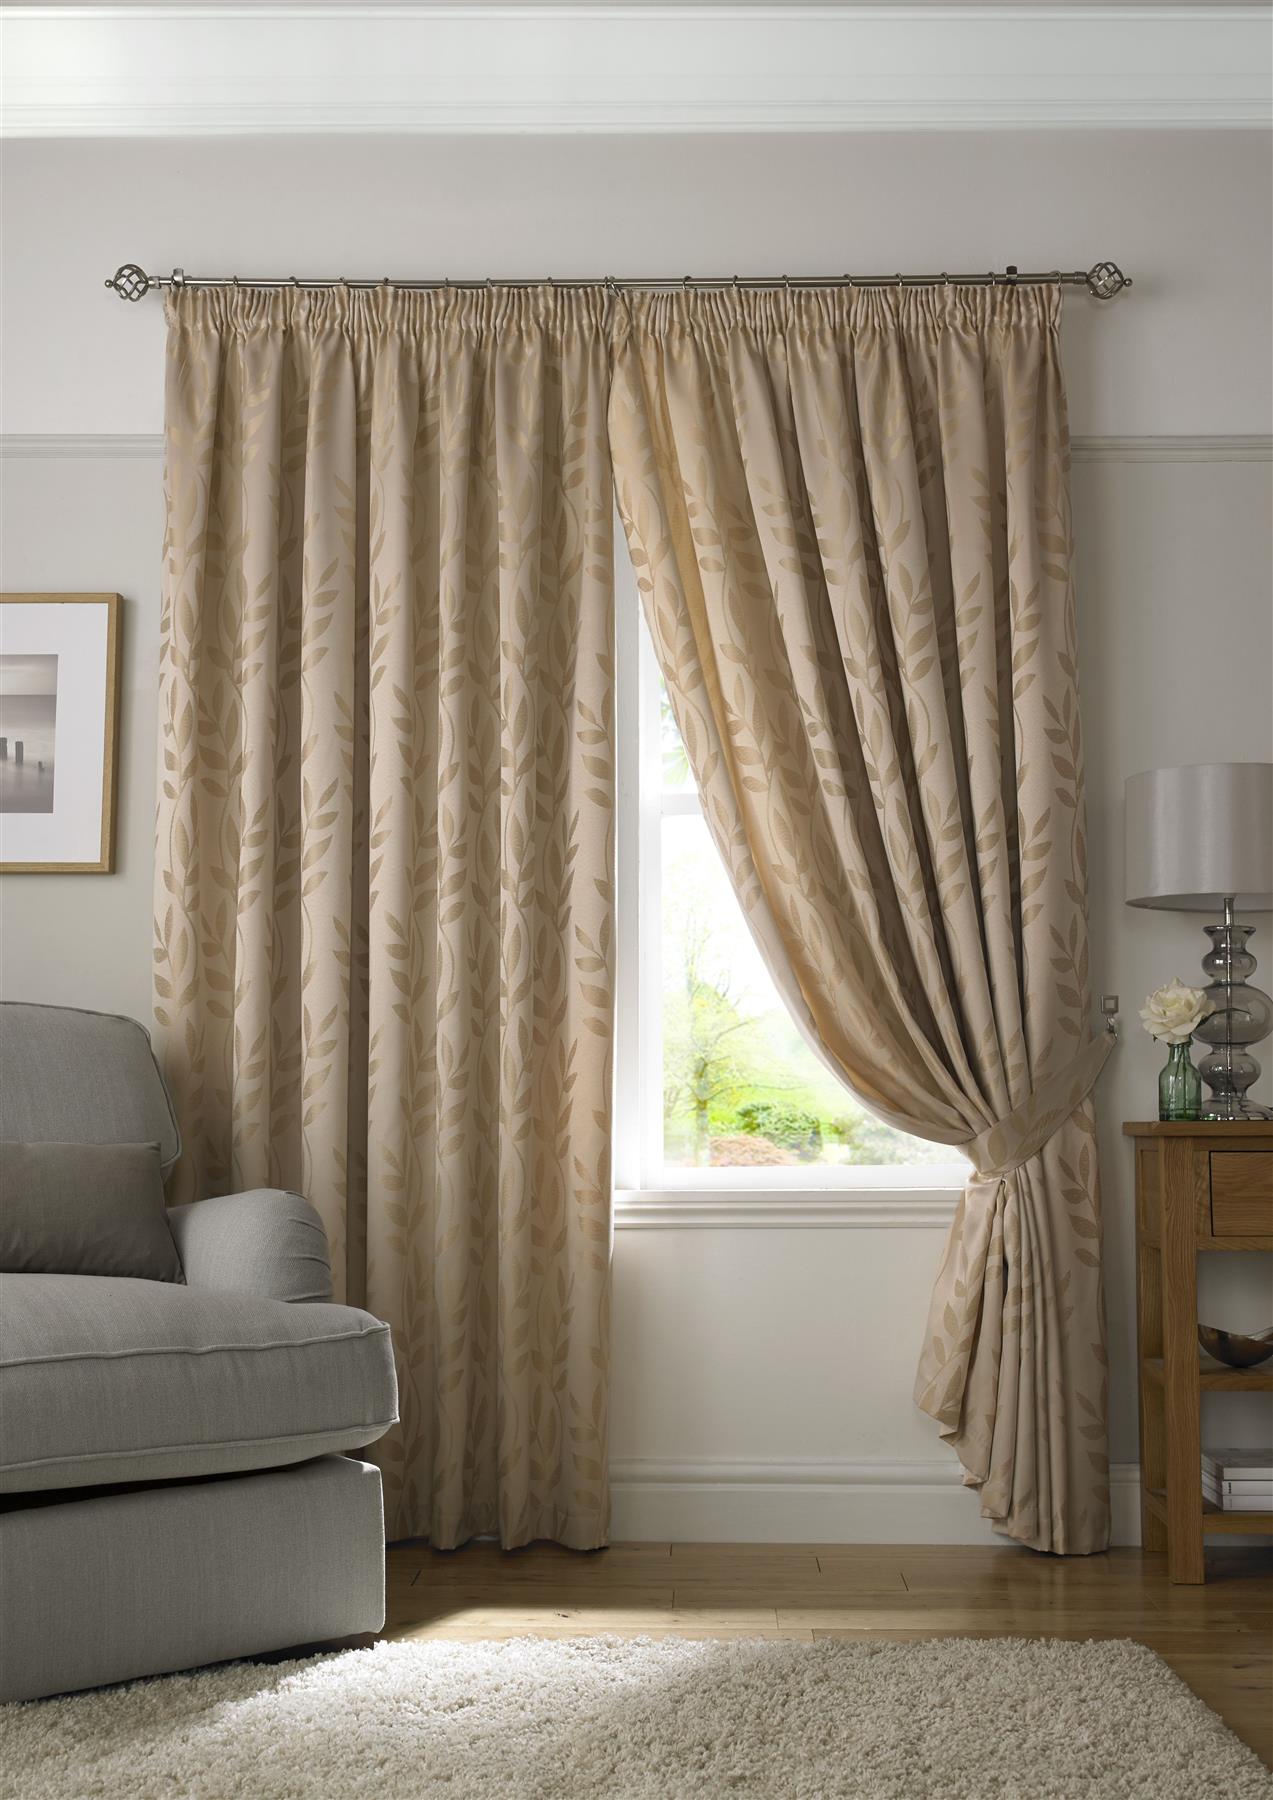 Latte Tivolia Fully Lined Pencil Pleat Curtains - Pair - Including Free Tie Backs